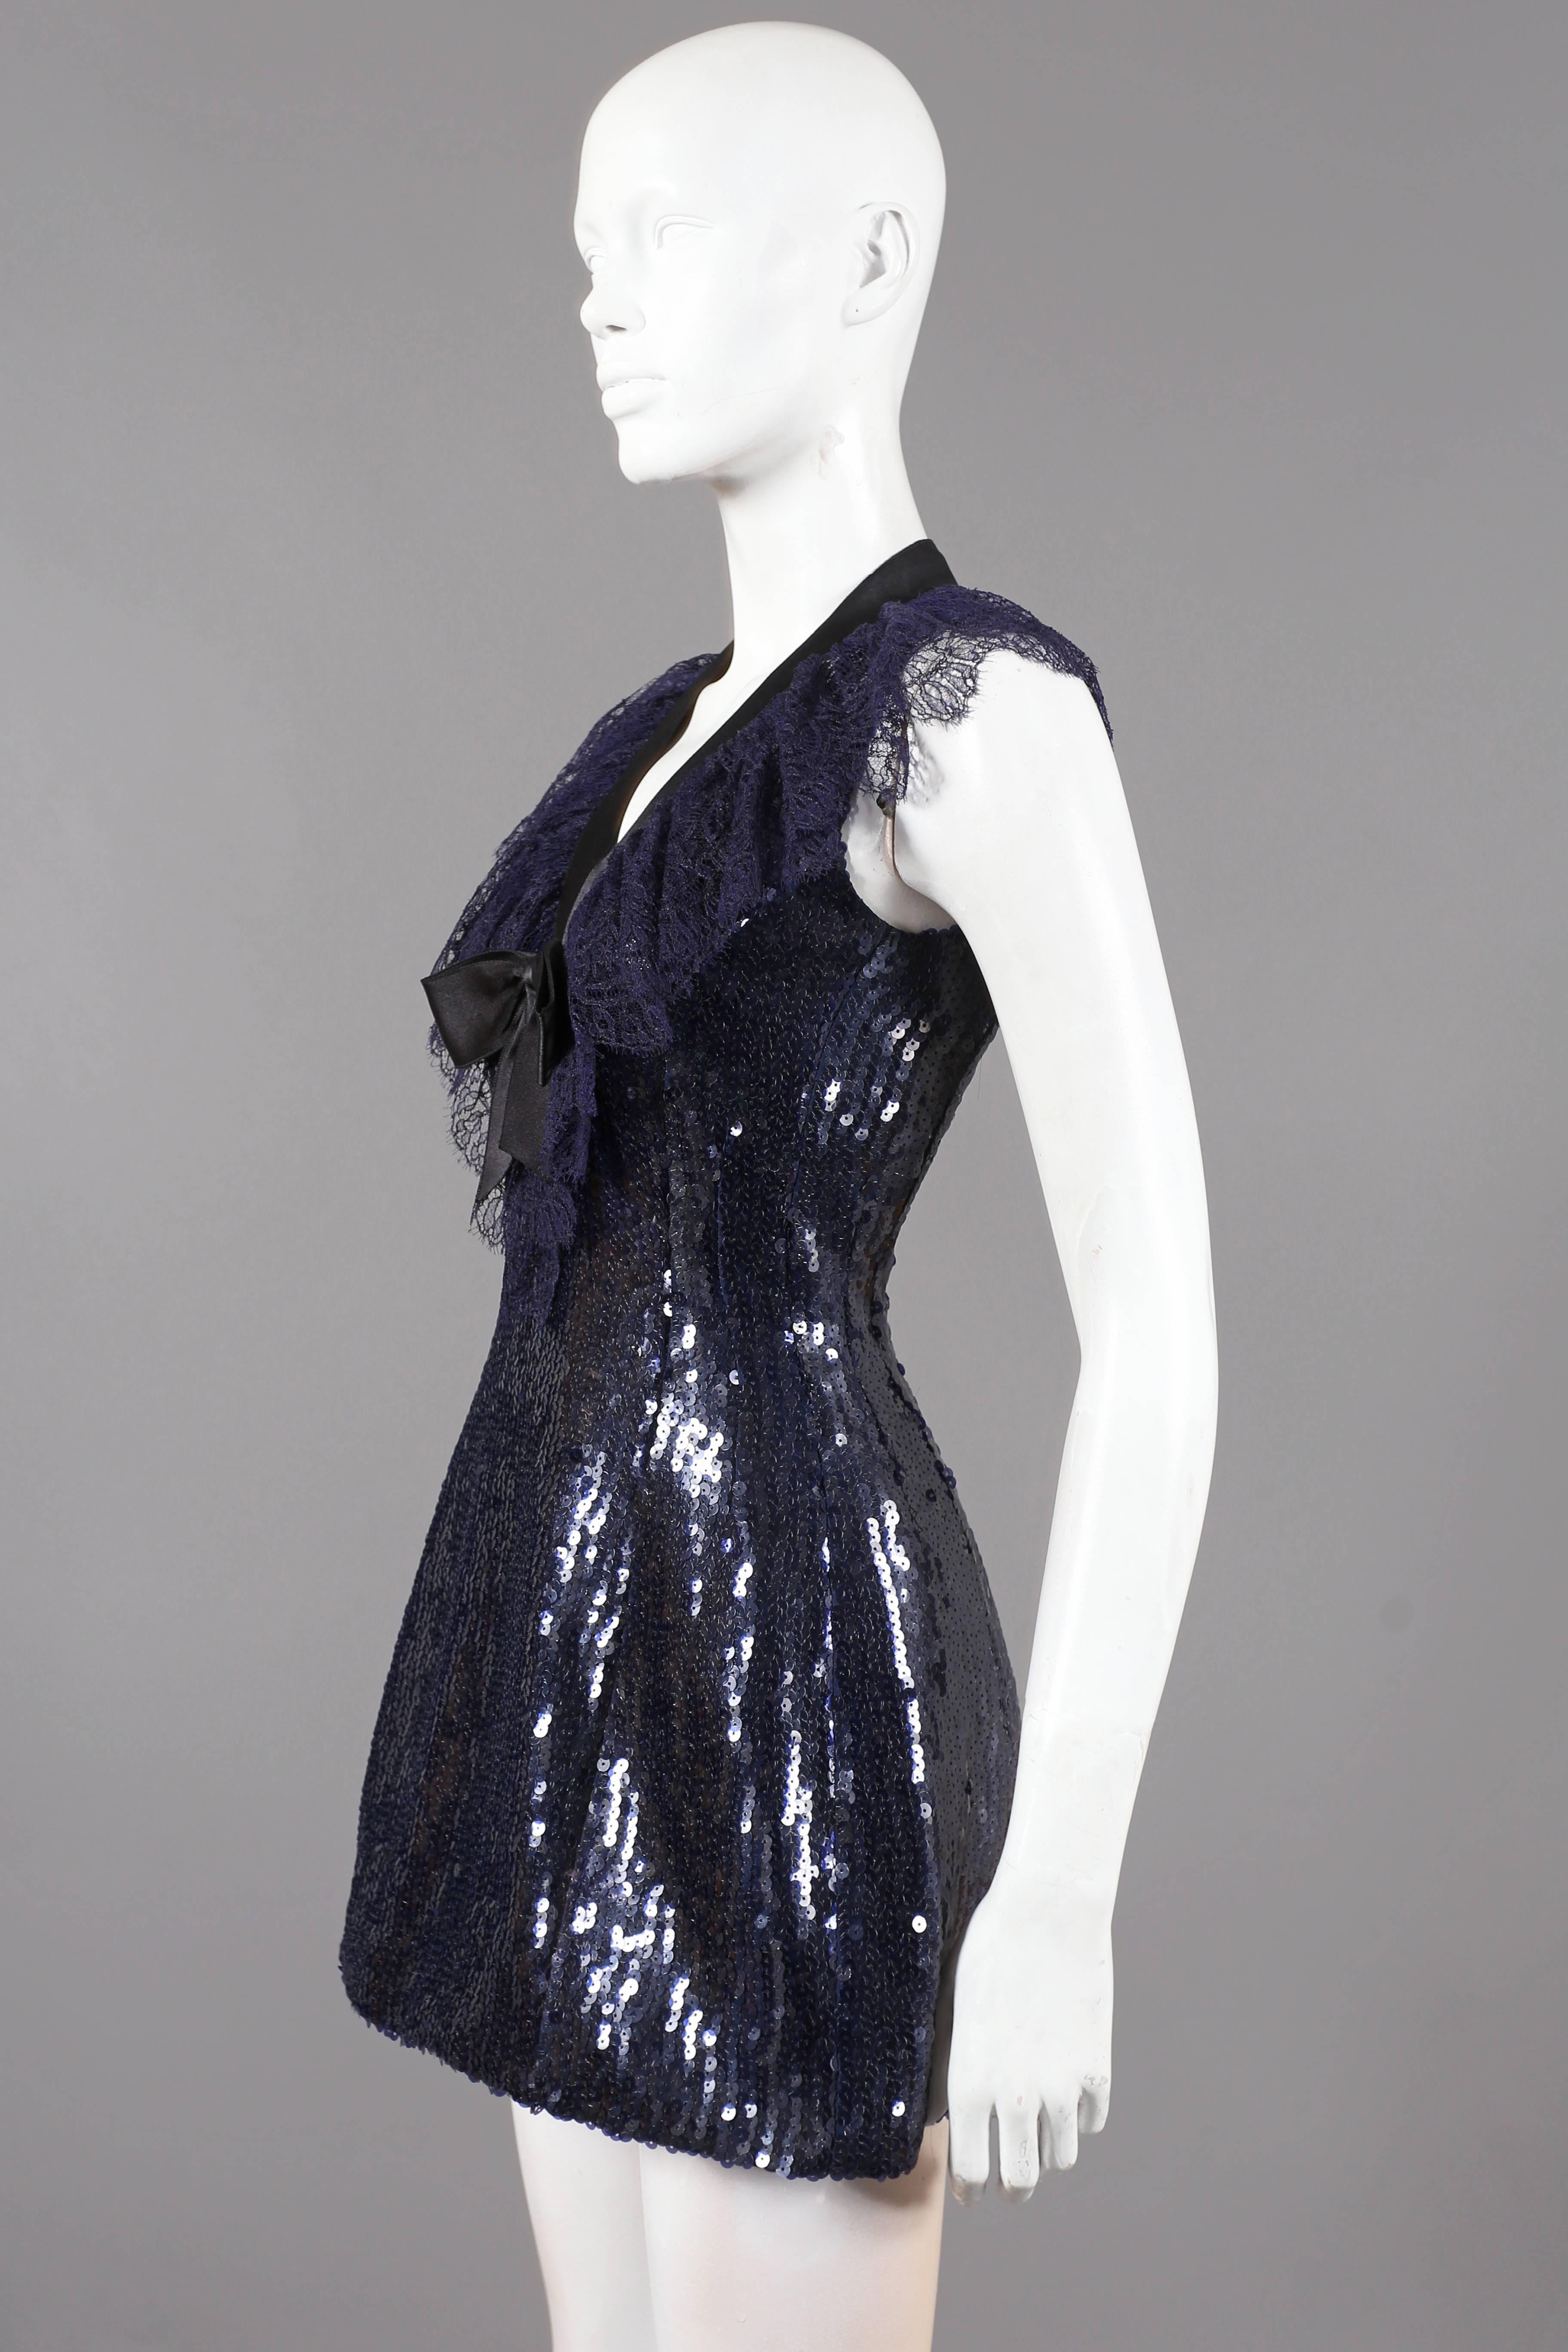 Black Chanel navy blue sequinned mini dress with lace collar and satin bow, C. 1987